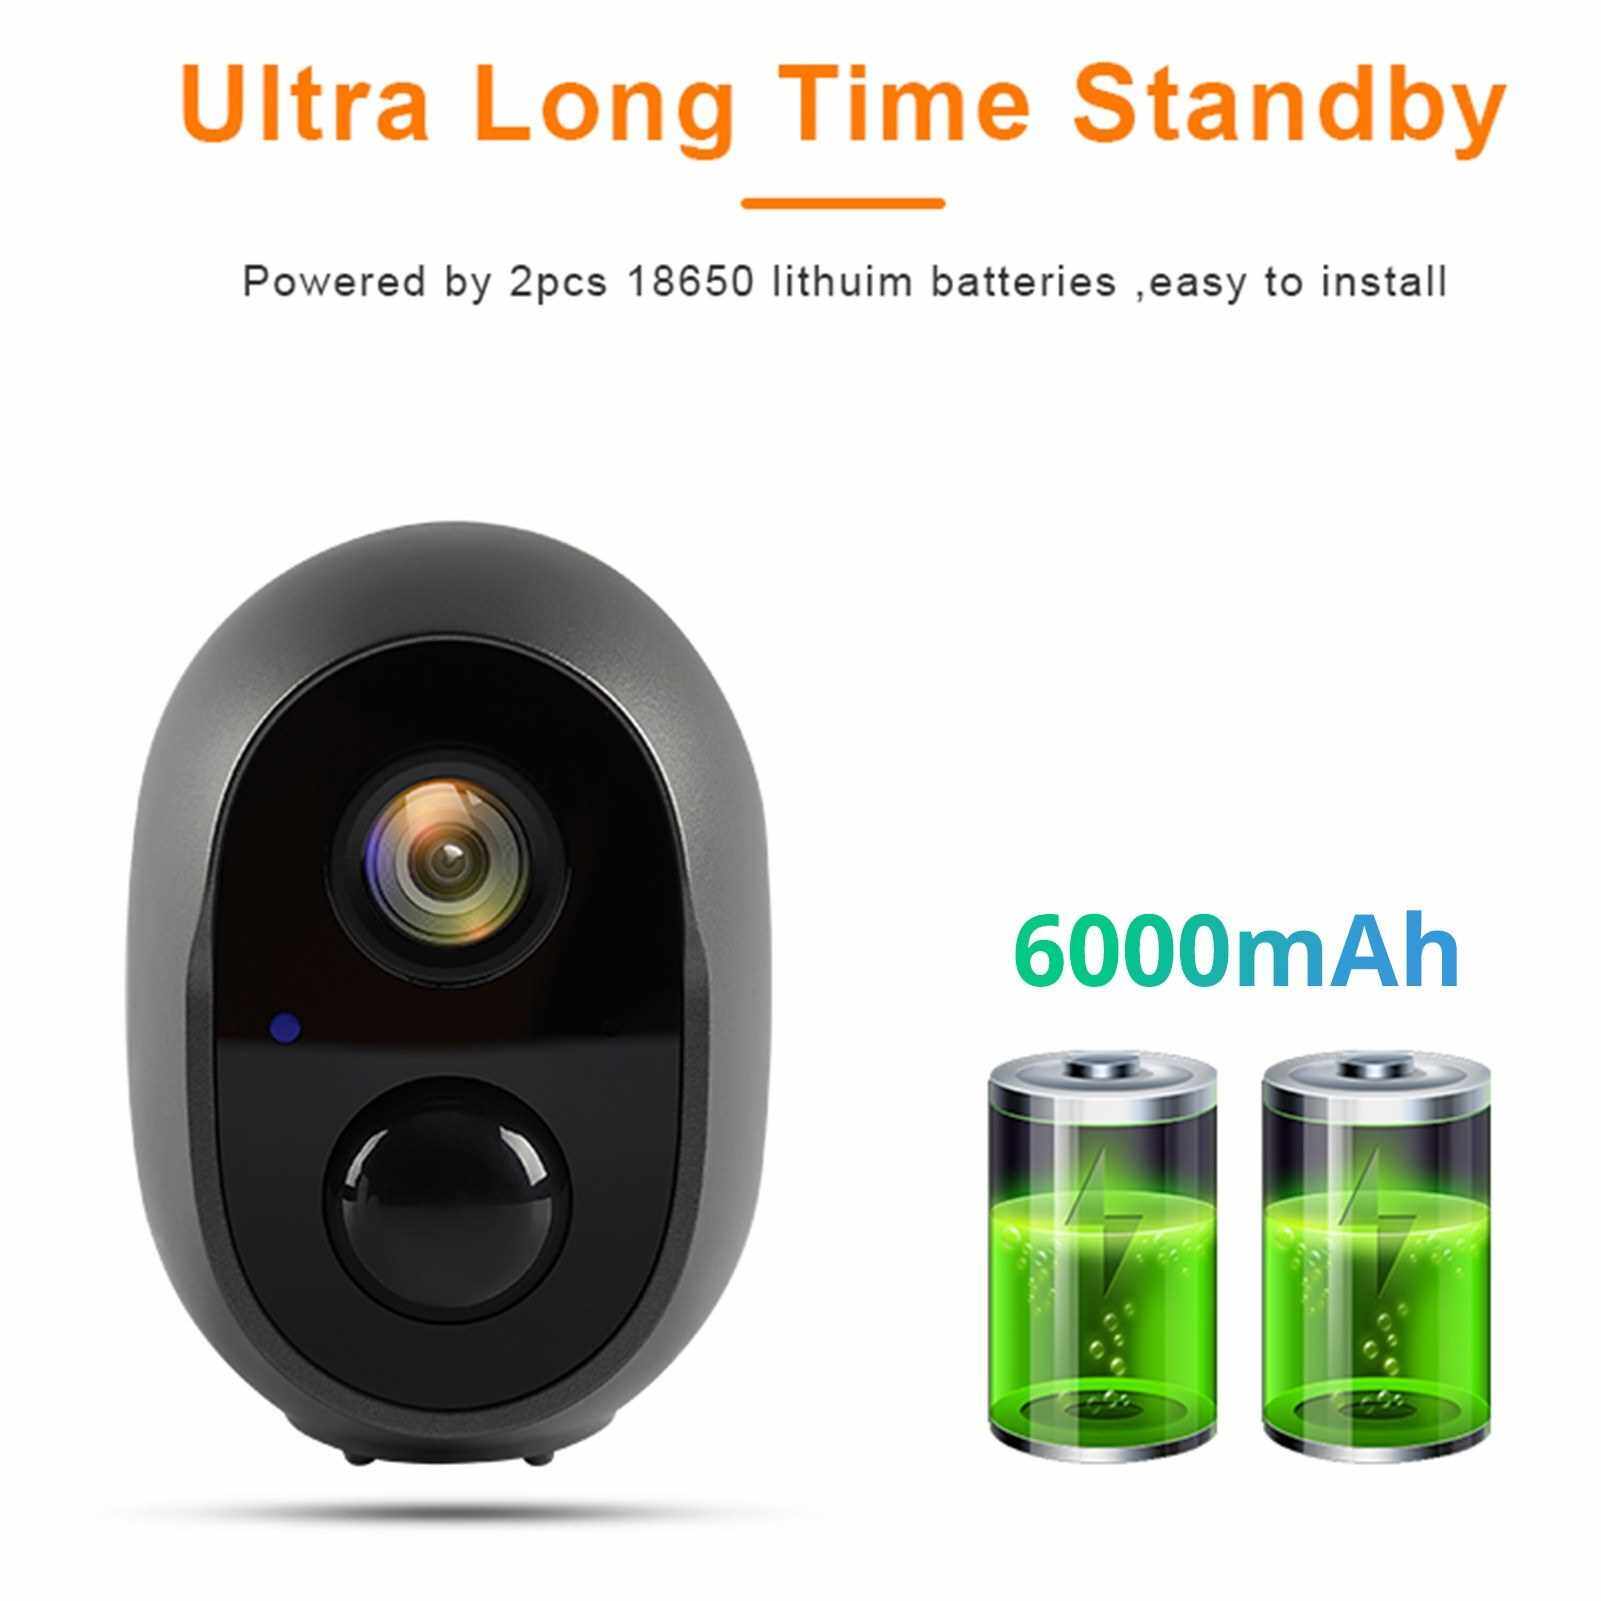 2 MP Rechargeable Battery Security Camera 2.4G WiFi Wireless 1080P Home Surveillance Camera Outdoor with 2-Way Audio/Night Vision/Motion Detection/IP66 Waterproof with 2pcs Batteries (Grey)